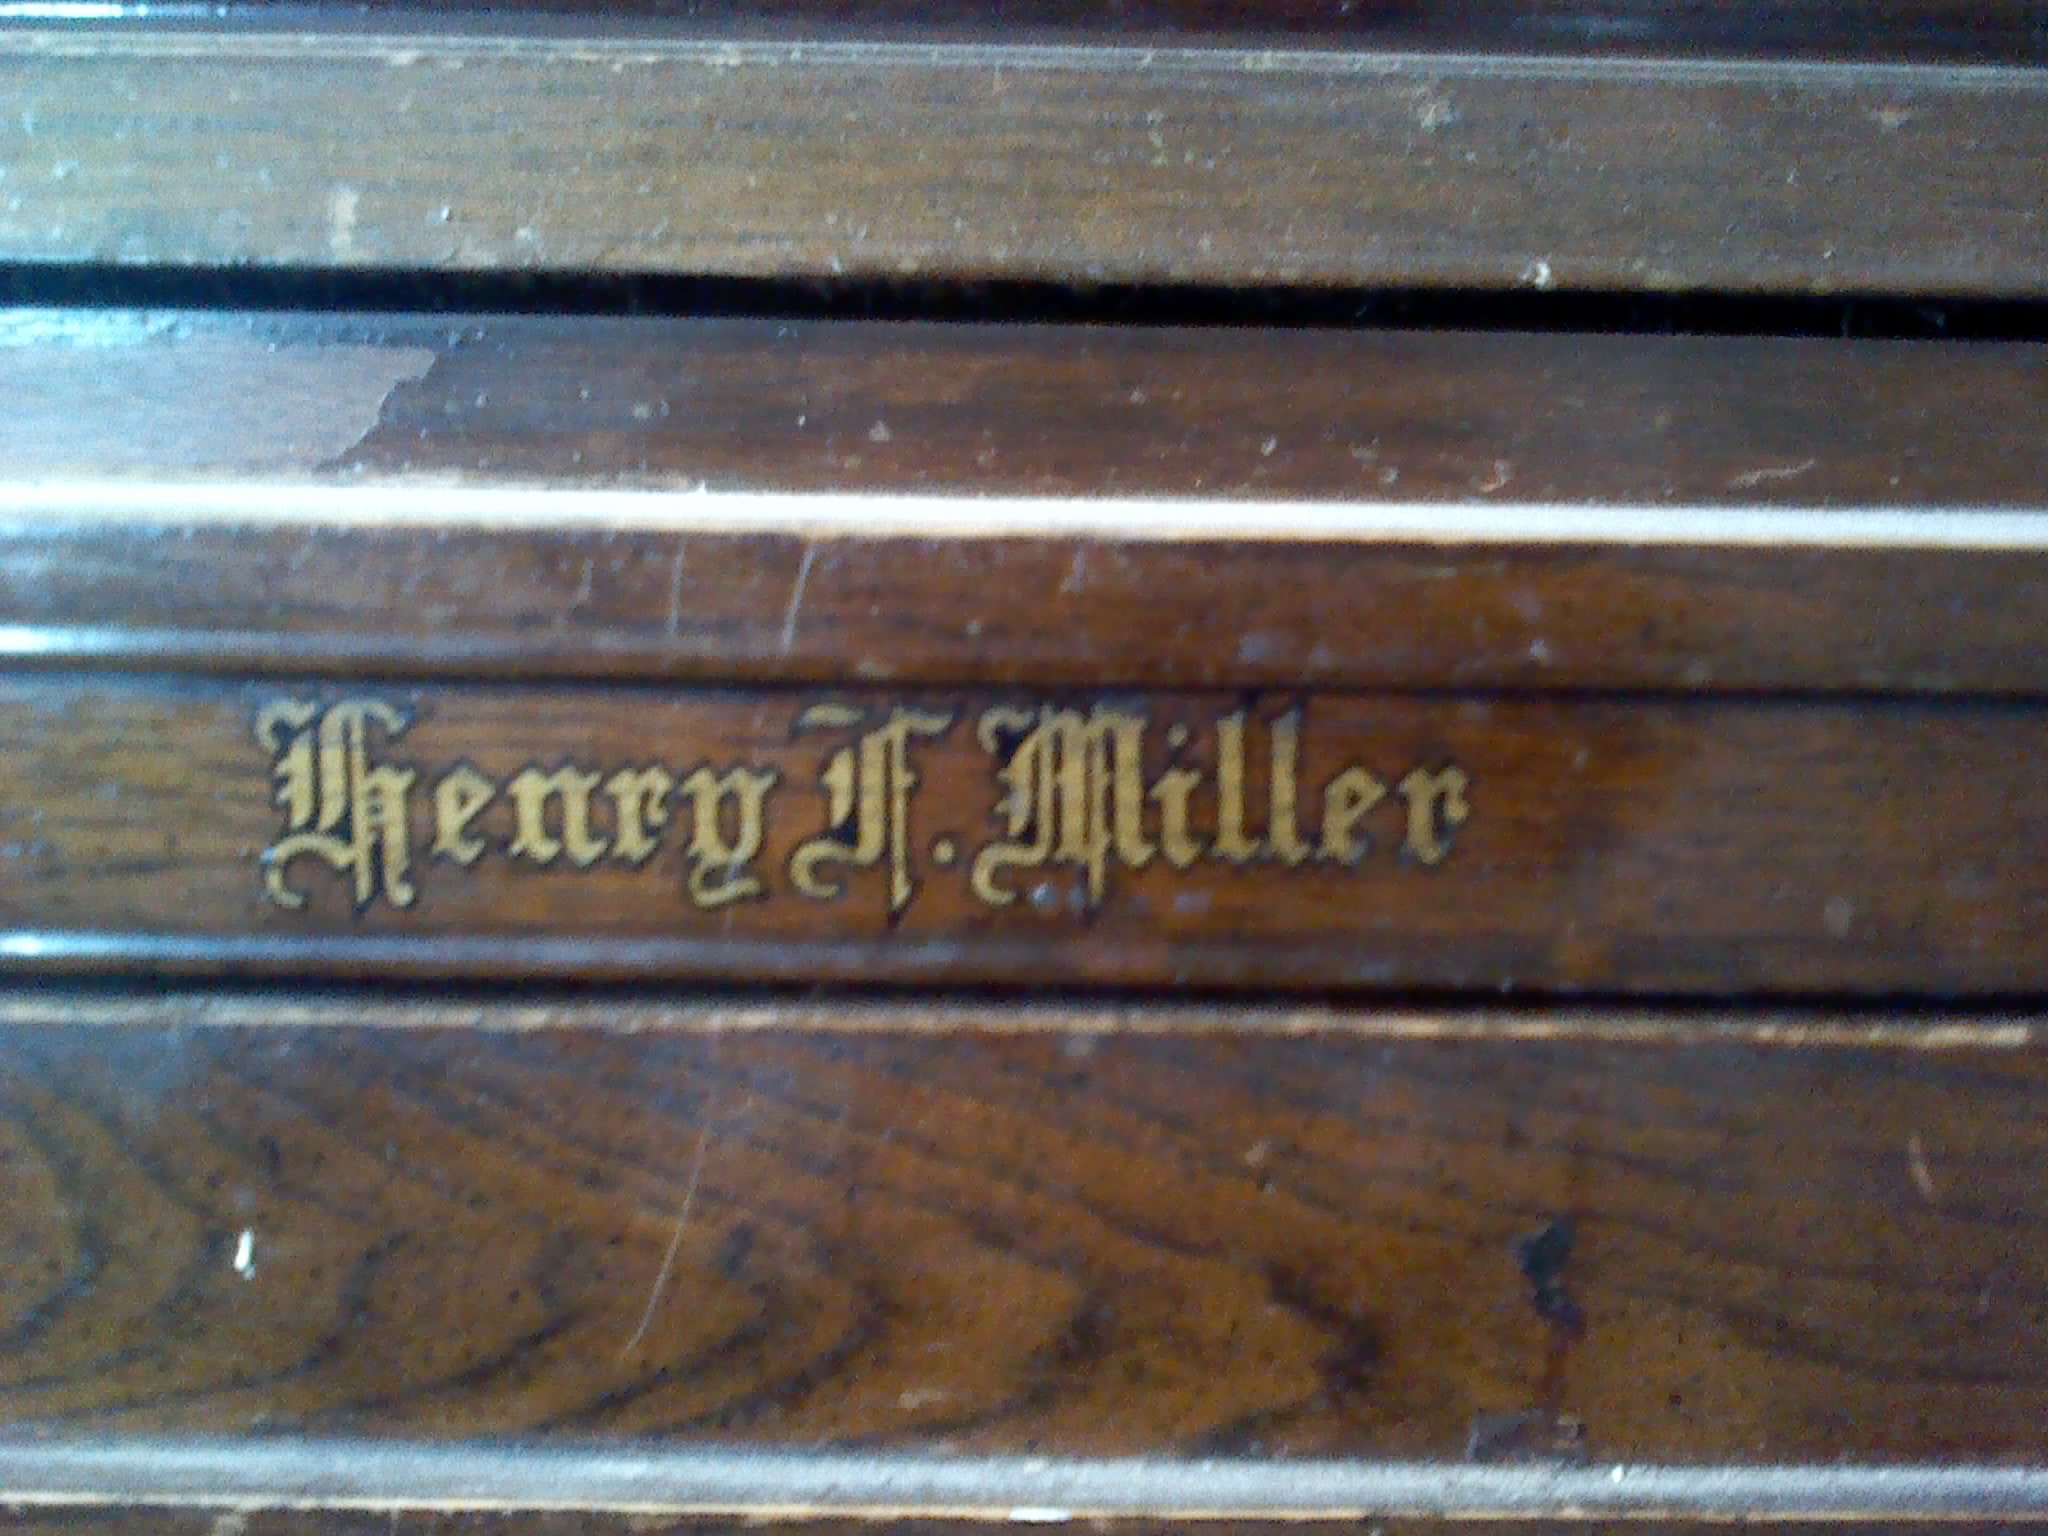 Henry F Miller upright piano